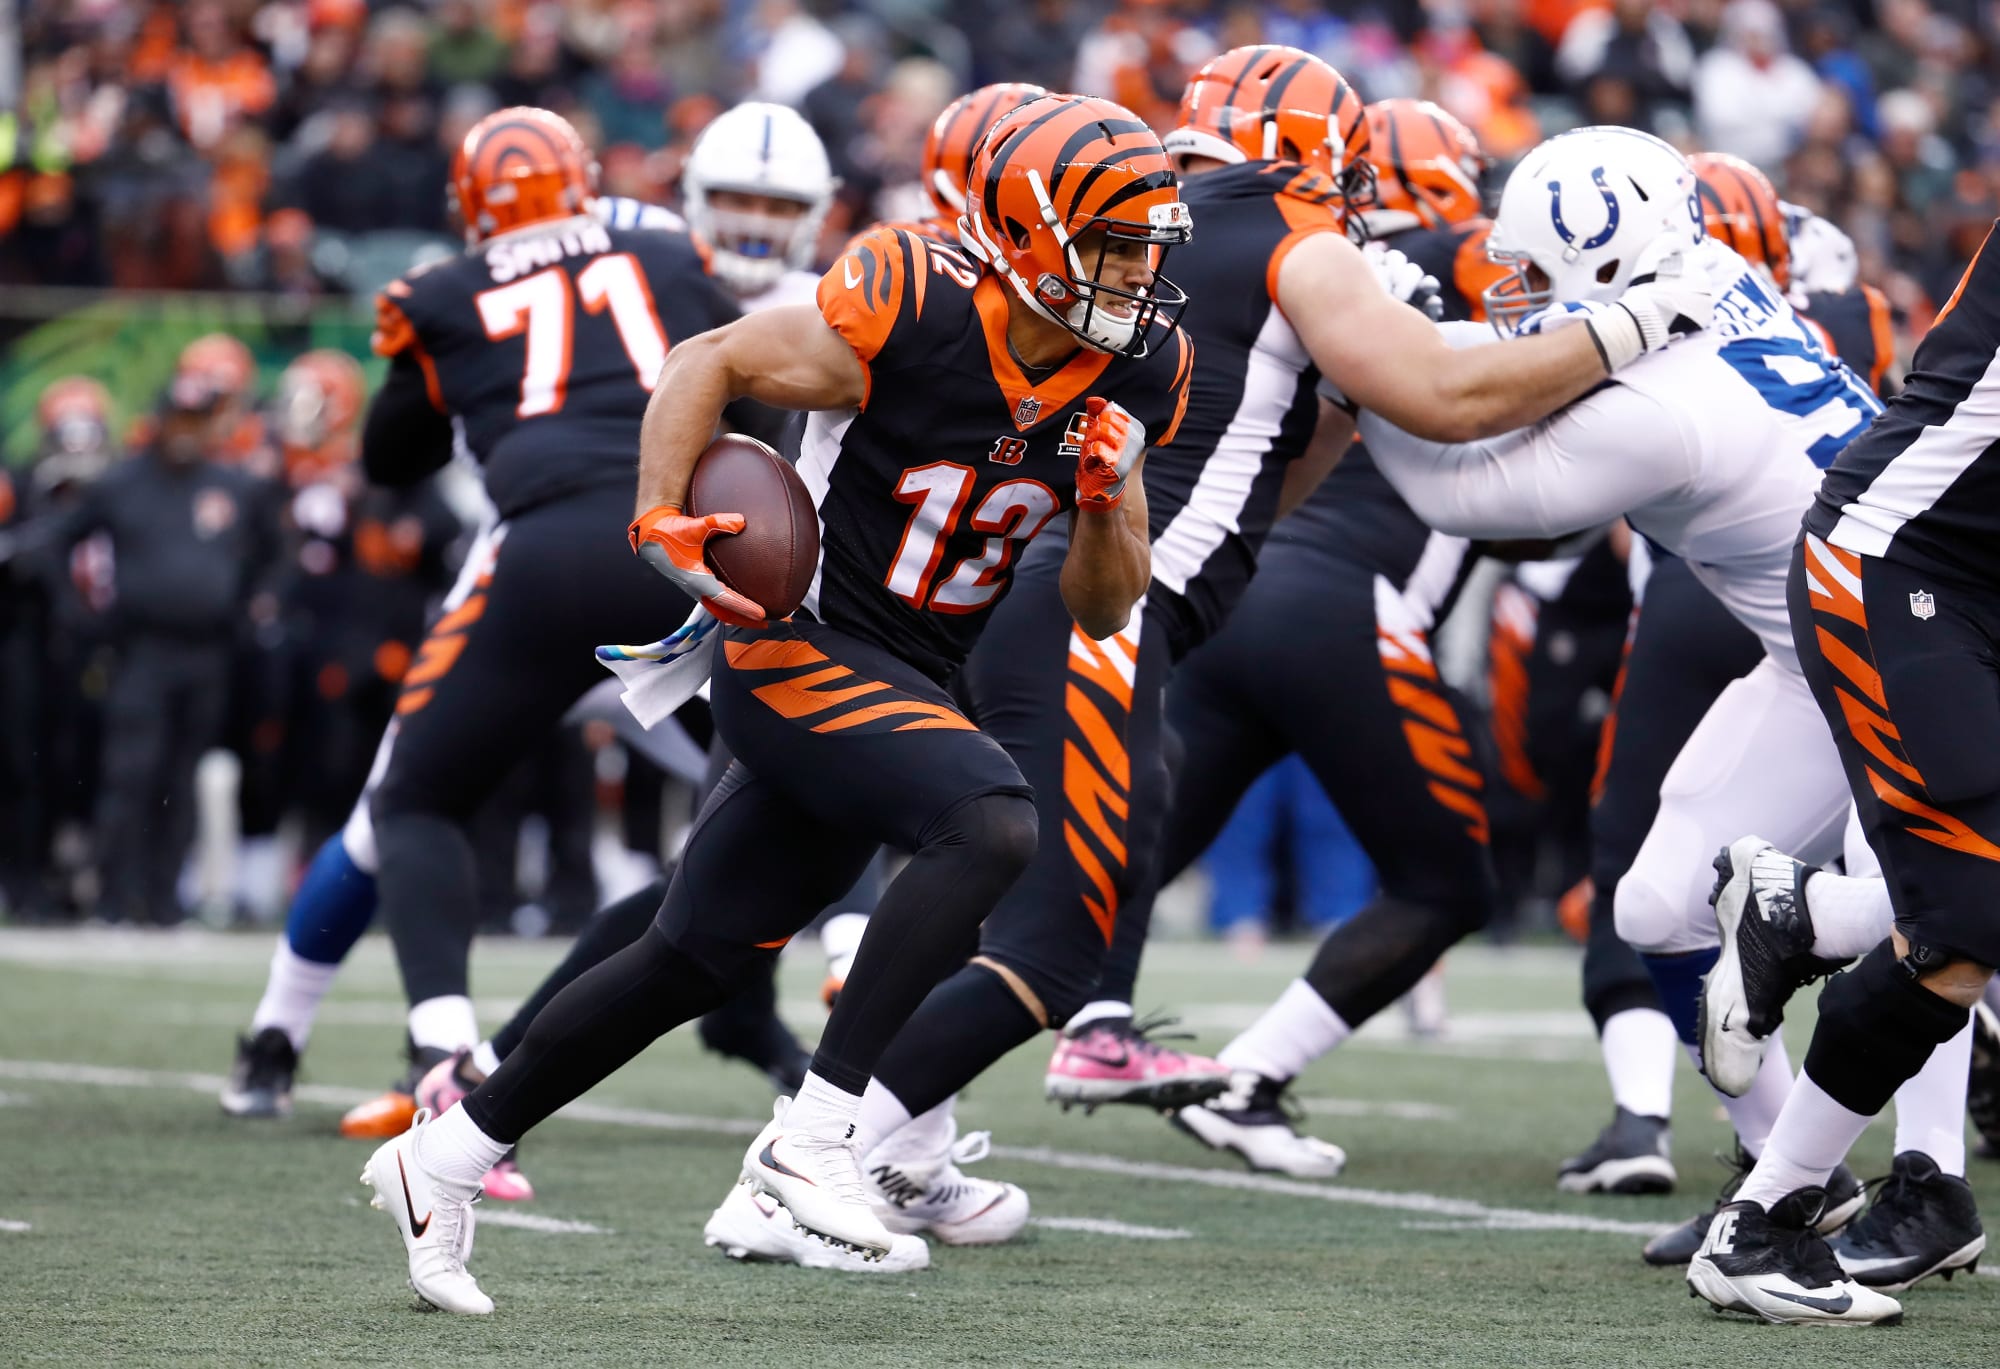 What did we learn from Bengals vs Colts in Week 8?